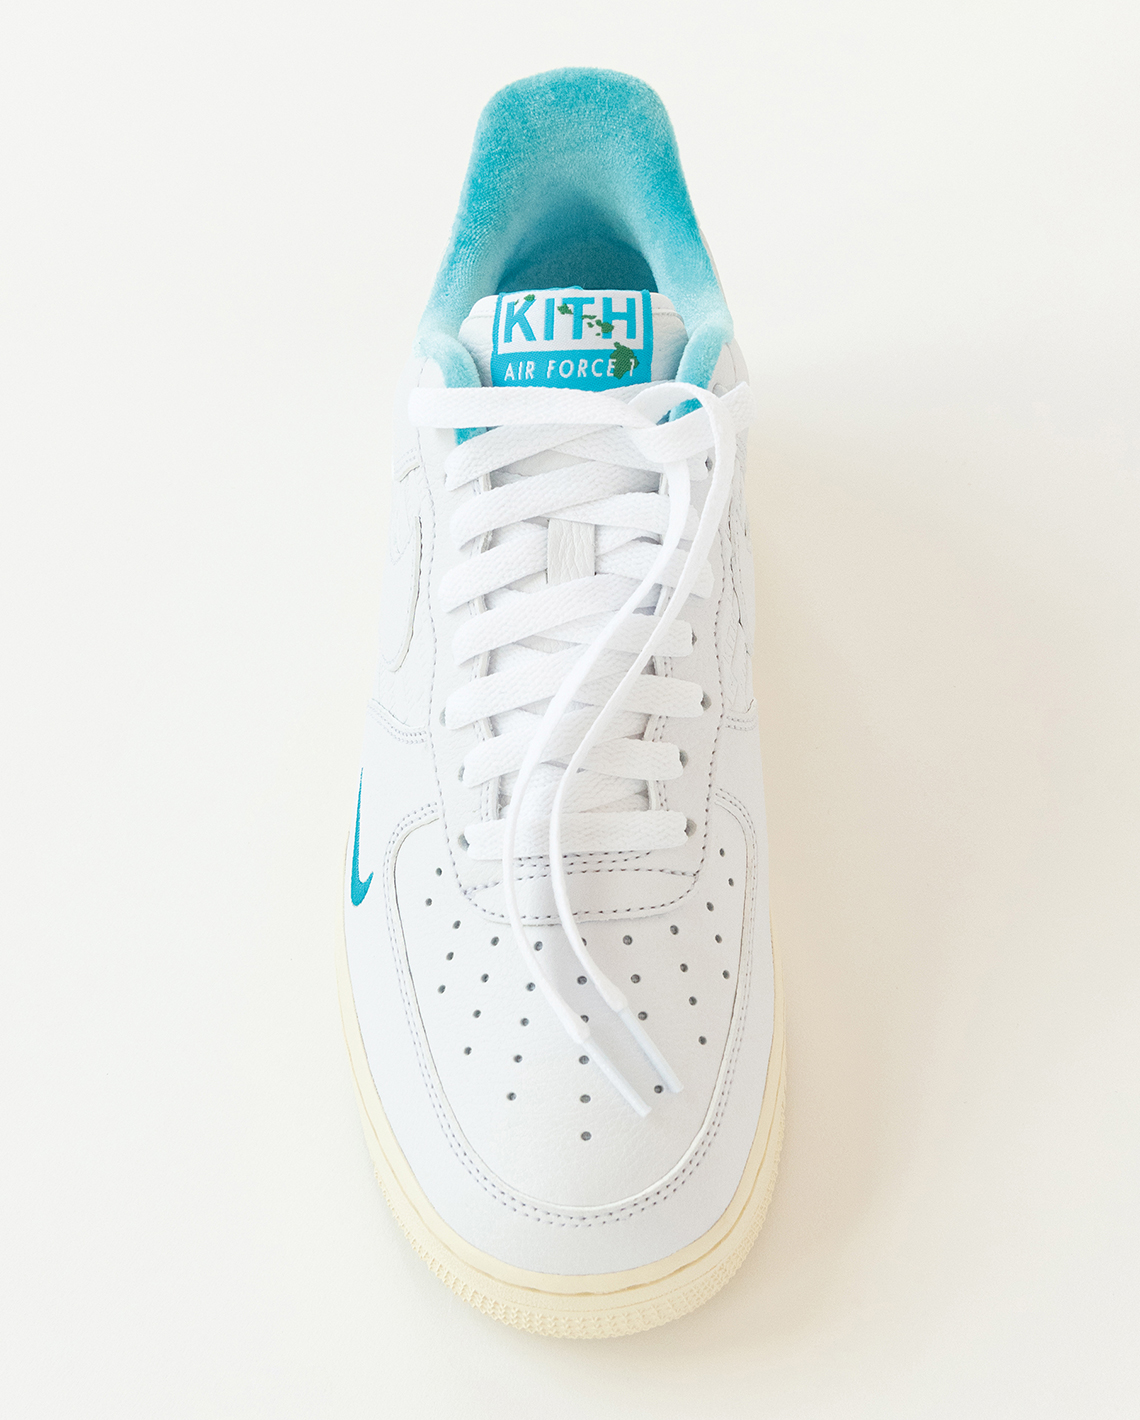 Kith Air Force 1 Hawaii Release Date 6